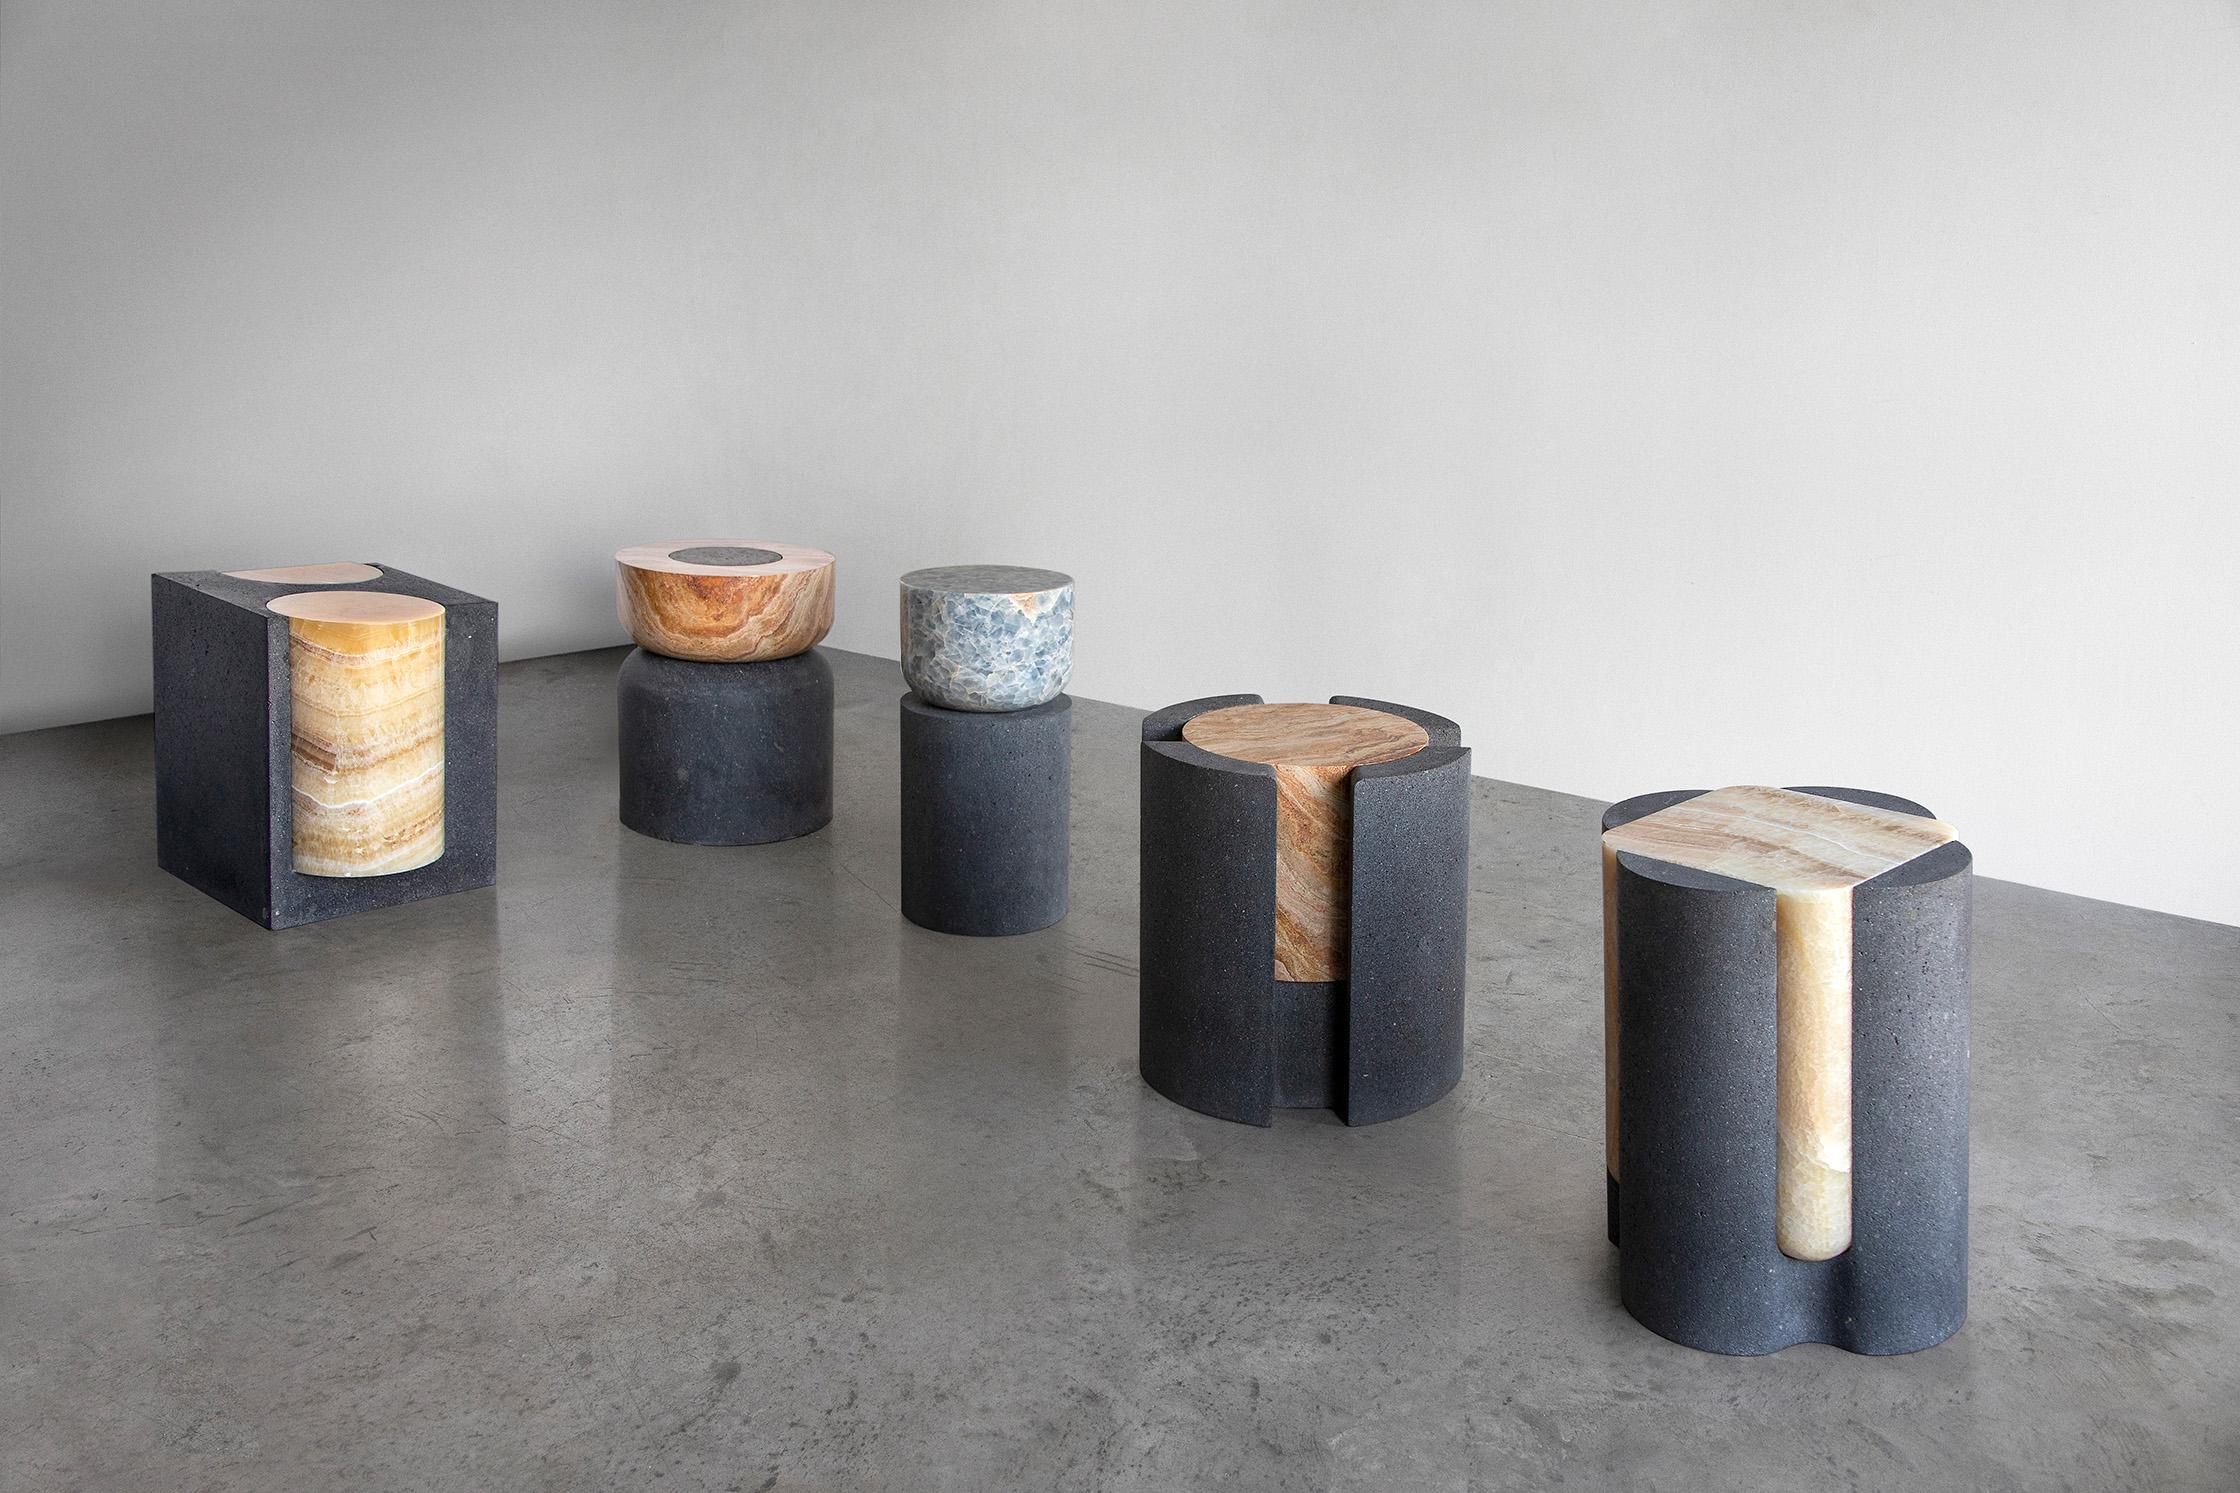 Volcanic Shade V Stool/Table by Sten Studio, Represented by Tuleste Factory 3